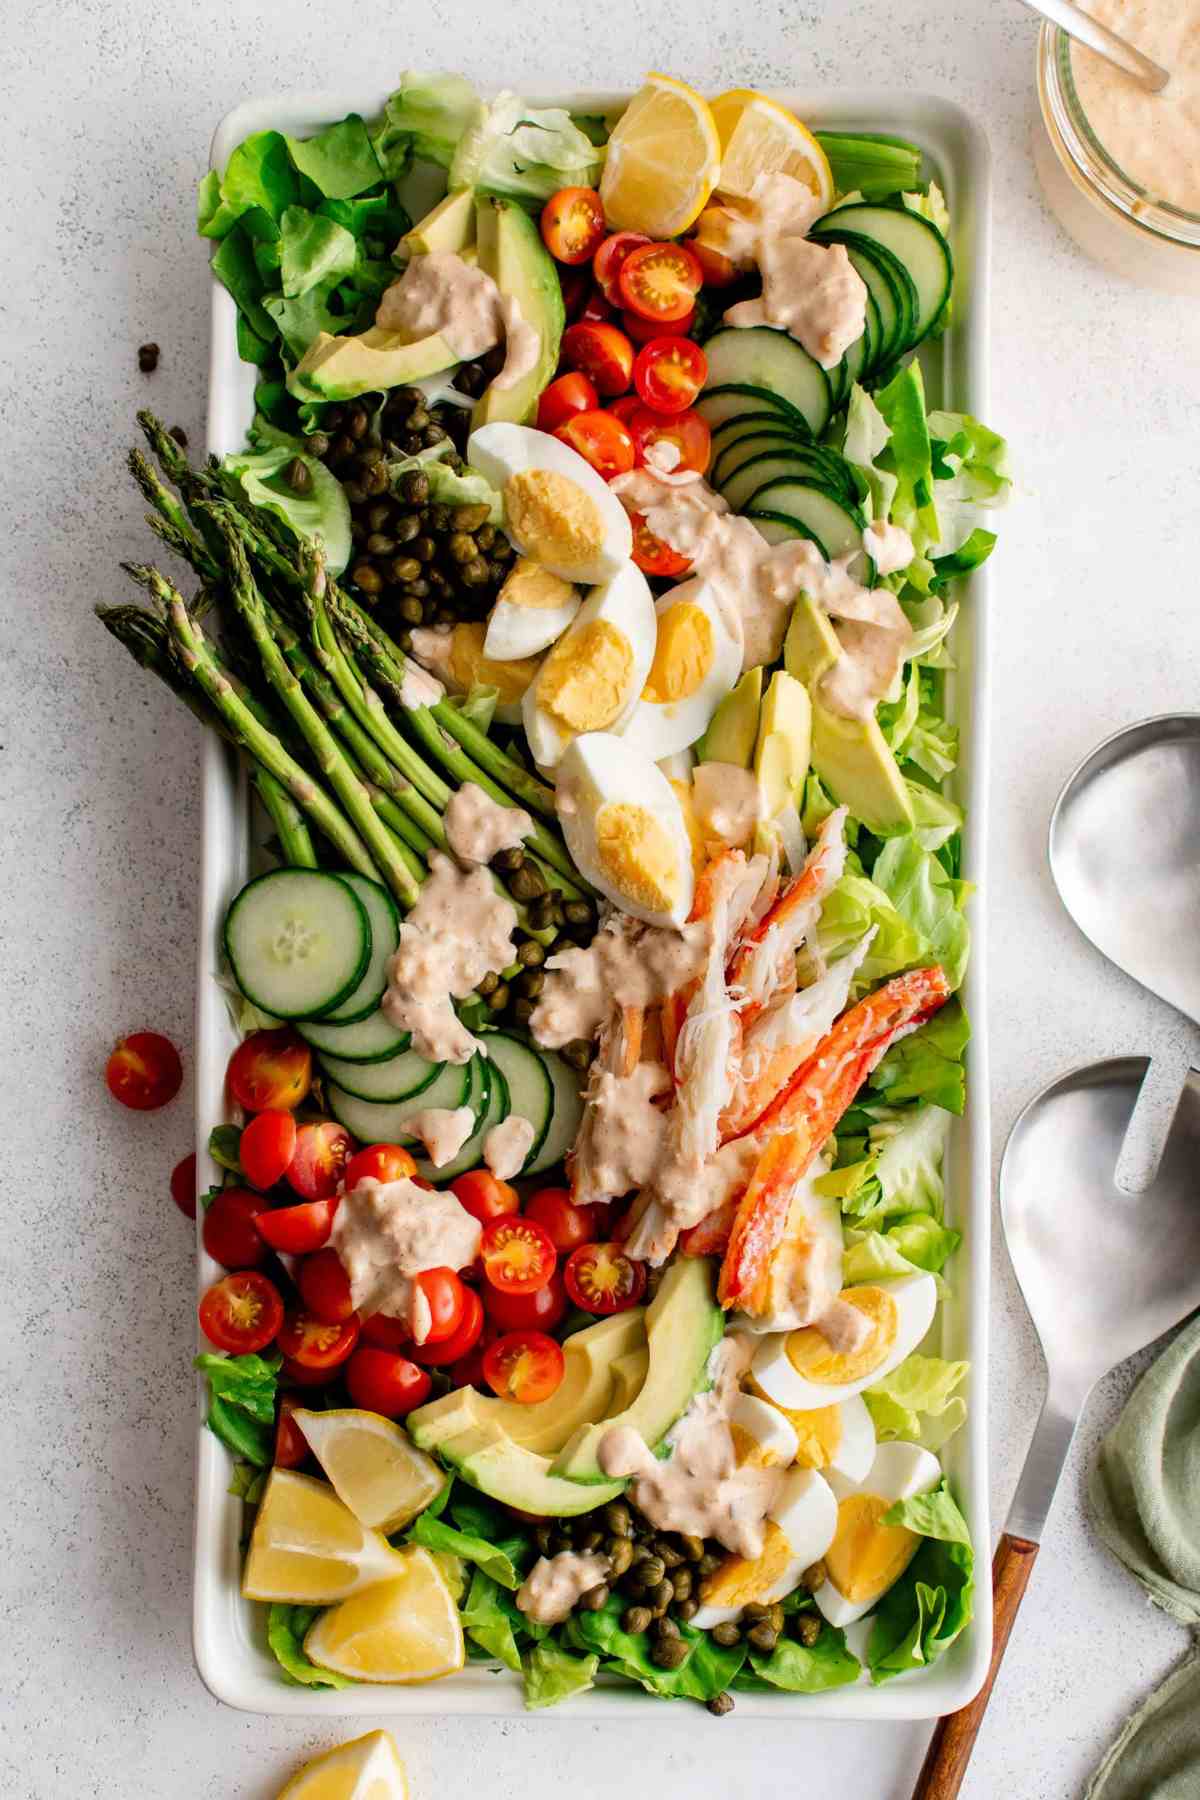 Rectangular platter with deconstructed crab louie salad with asparagus, tomatoes, avocado, lettuce, crab meat and more.